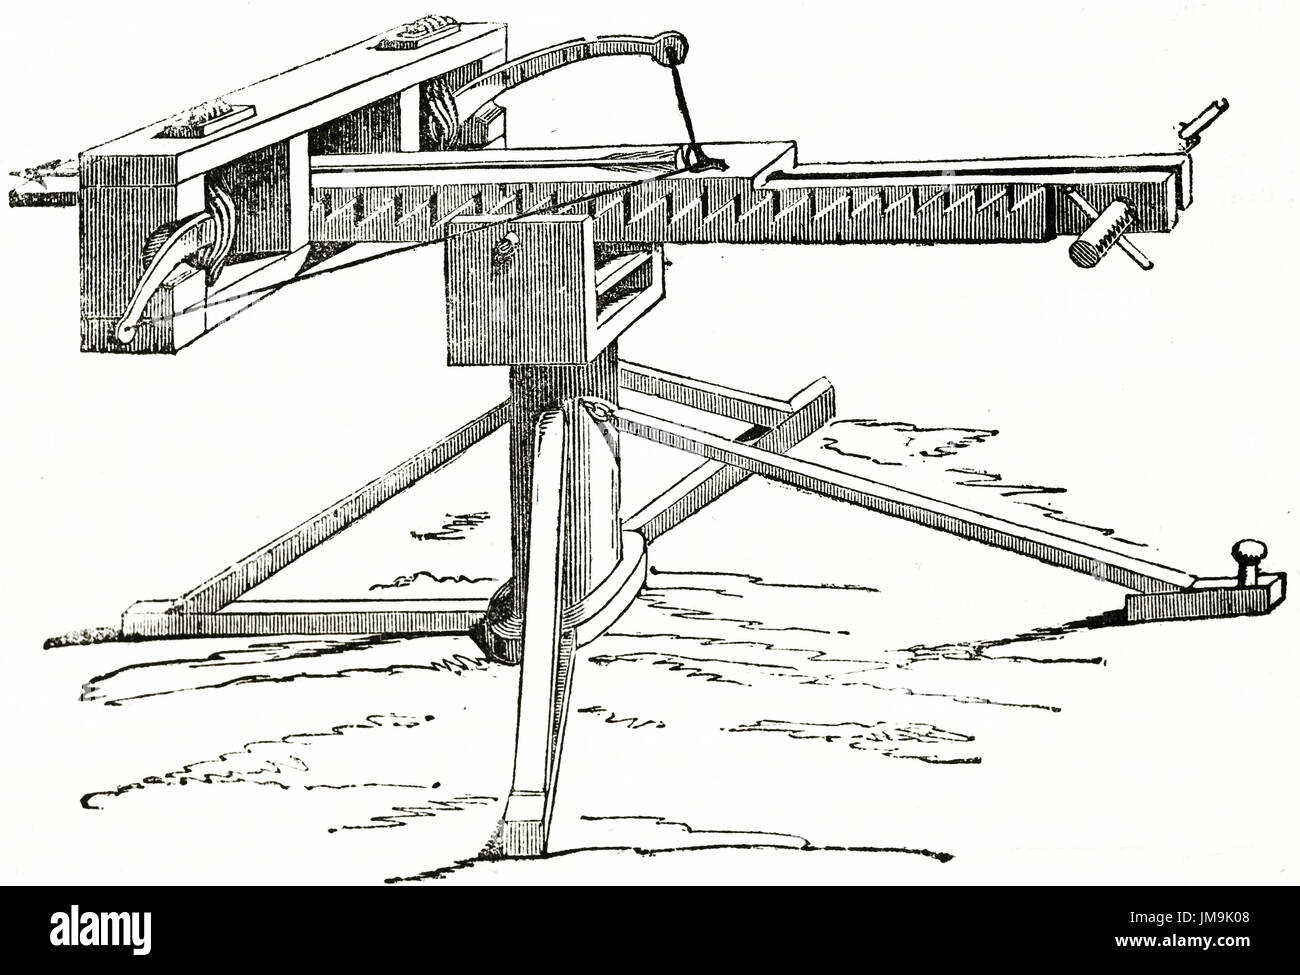 Old illustration of antique crossbow on a tripod. By unidentified author, published on Magasin Pittoresque, Paris, 1837. Stock Photo